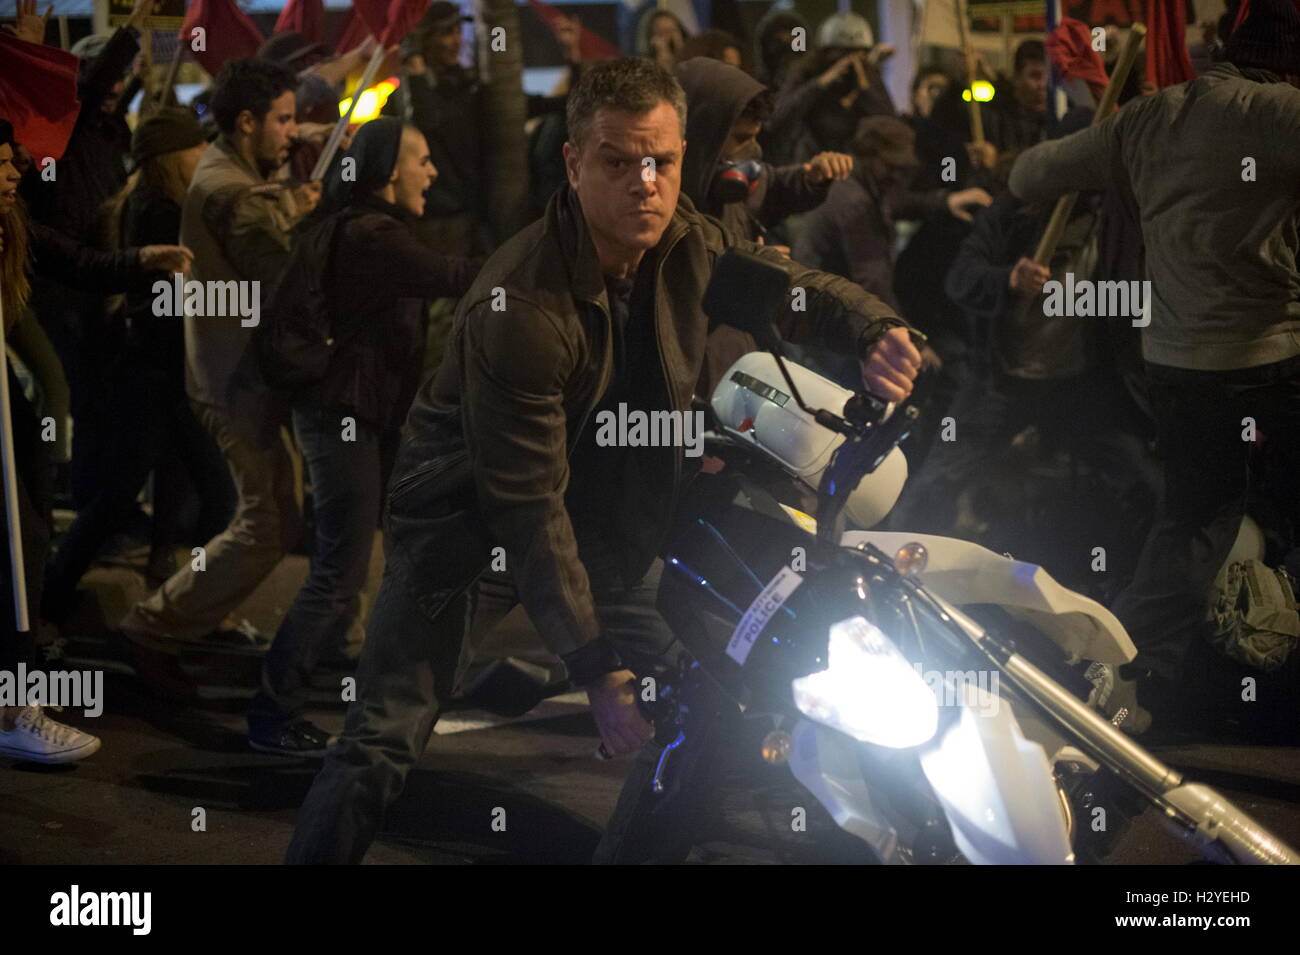 RELEASE DATE: July 29, 2016 TITLE: Jason Bourne STUDIO: Universal Pictures DIRECTOR: Paul Greengrass PLOT: The CIA's most dangerous former operative is drawn out of hiding to uncover more explosive truths about his past STARRING: Matt Damon as Jason Bourne (Credit Image: c Universal Pictures/Entertainment Pictures/) Stock Photo